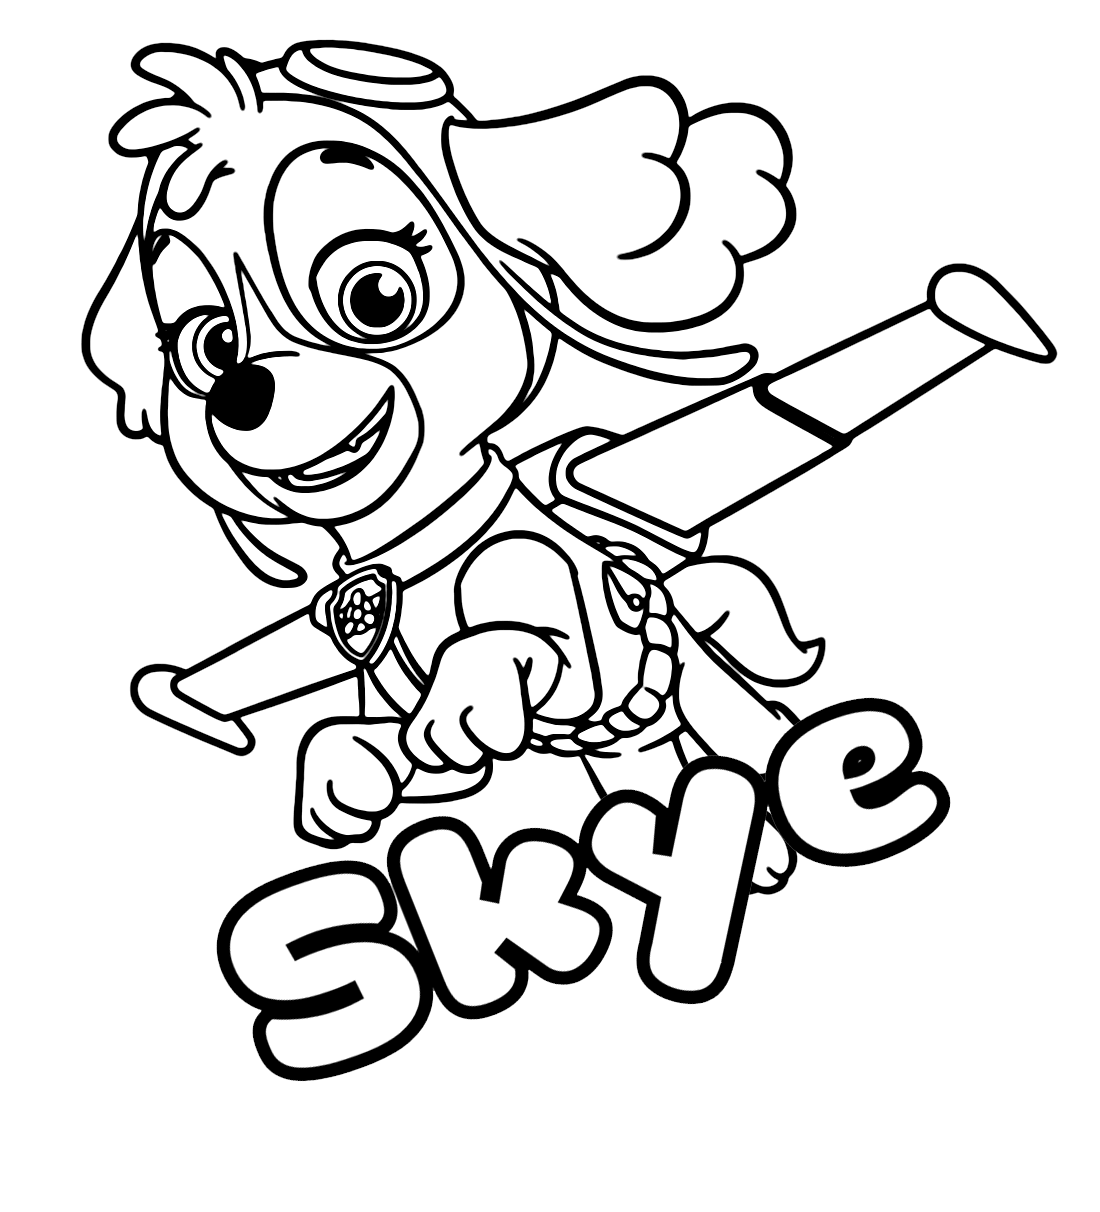 Skye paw patrol coloring pages printable for free download